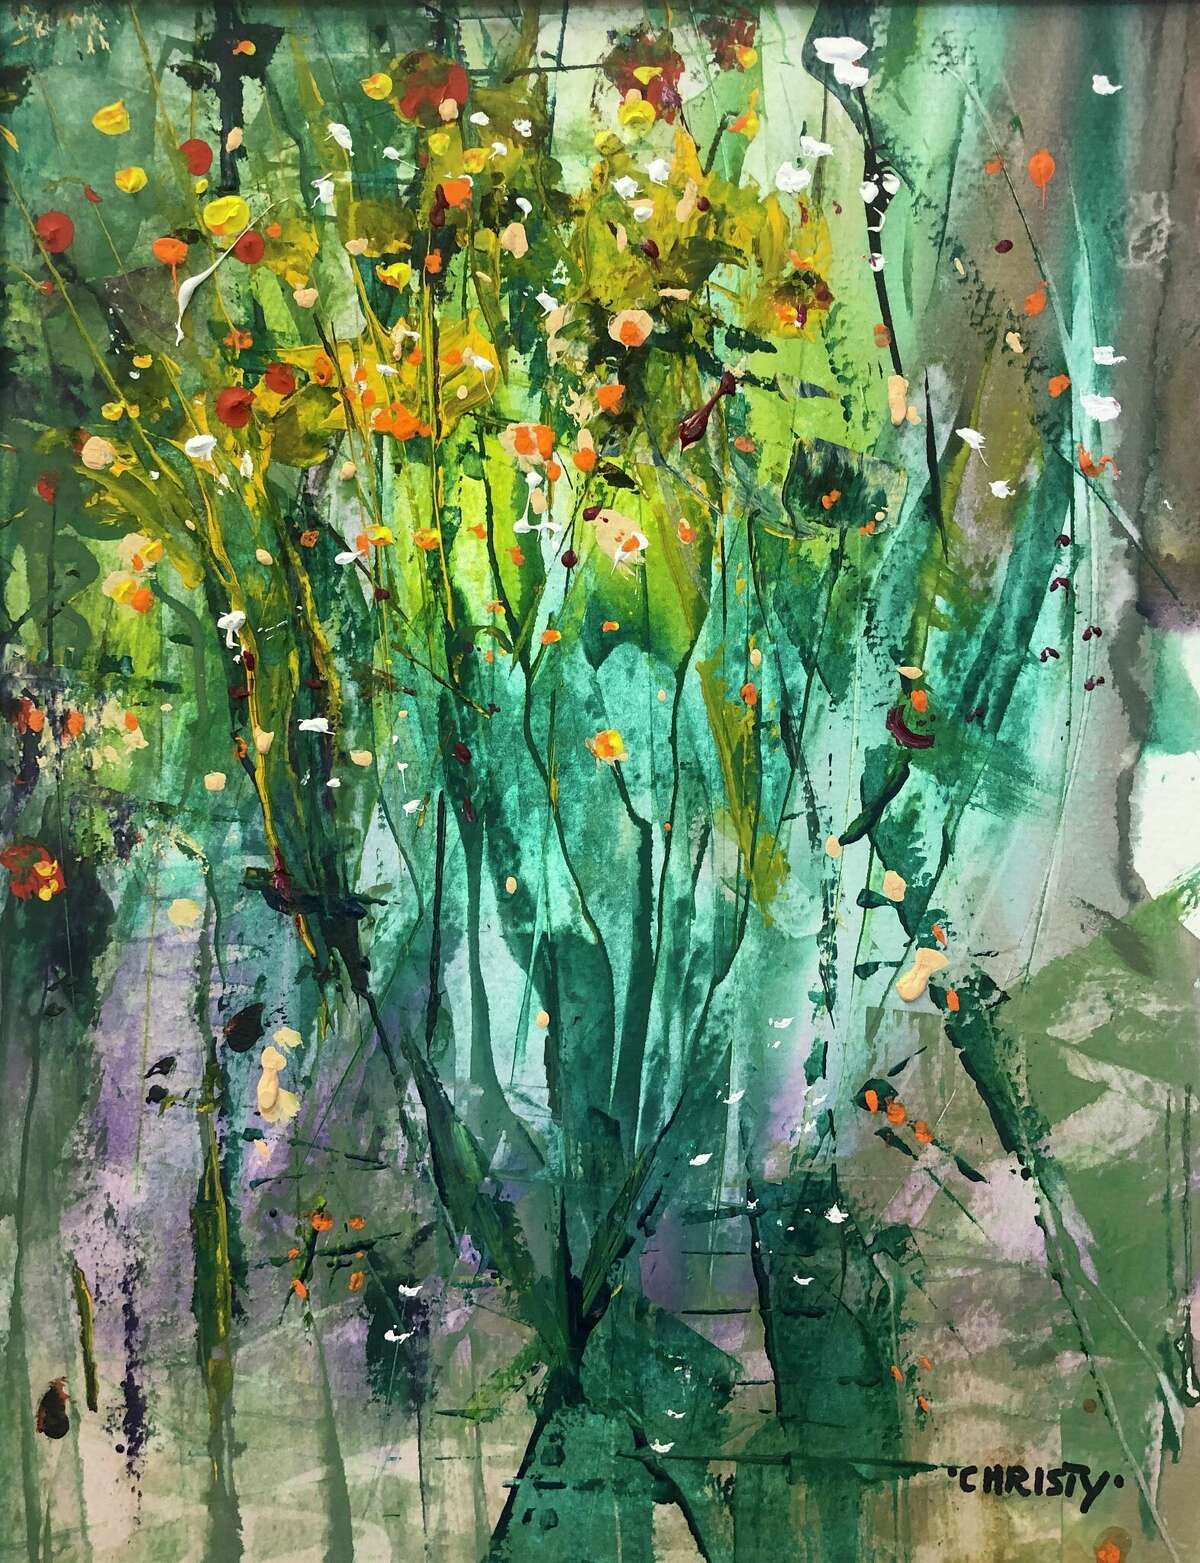 Marian Christy's artwork will be on display at MoCA Westport Oct. 15 through Nov. 27. Her paintings are known for her distinct Knifed Watercolors style. 